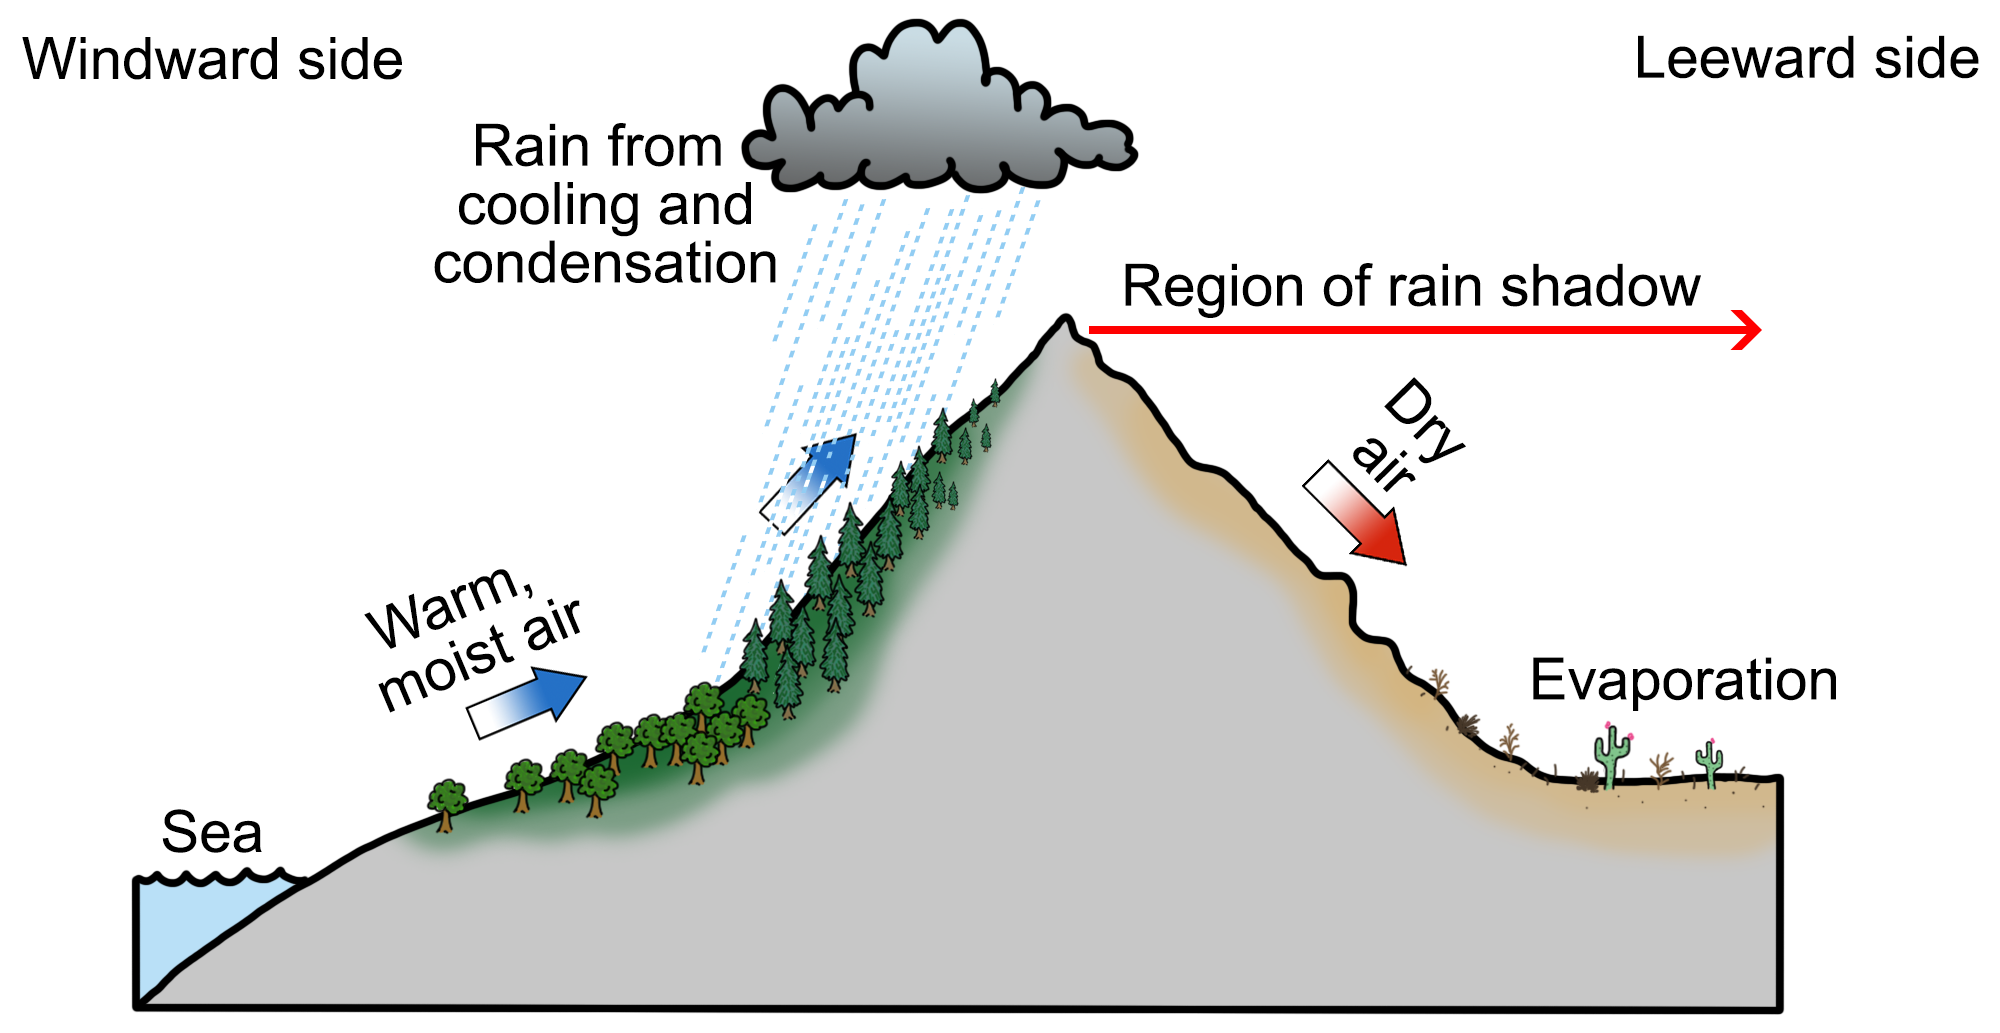 Diagram showing a rain shadow. The diagram is of a single, triangular mountain. To the left is a sea. As warm, moist air travels up the mountain from the see, it condense and cools, forming rain. On the opposite side of the mountain is the rain shadow. Dry air warms and expands, and evaporation occurs at the foot of the leeward side of the mountain. Thus, the leeward side of the mountain is dry.